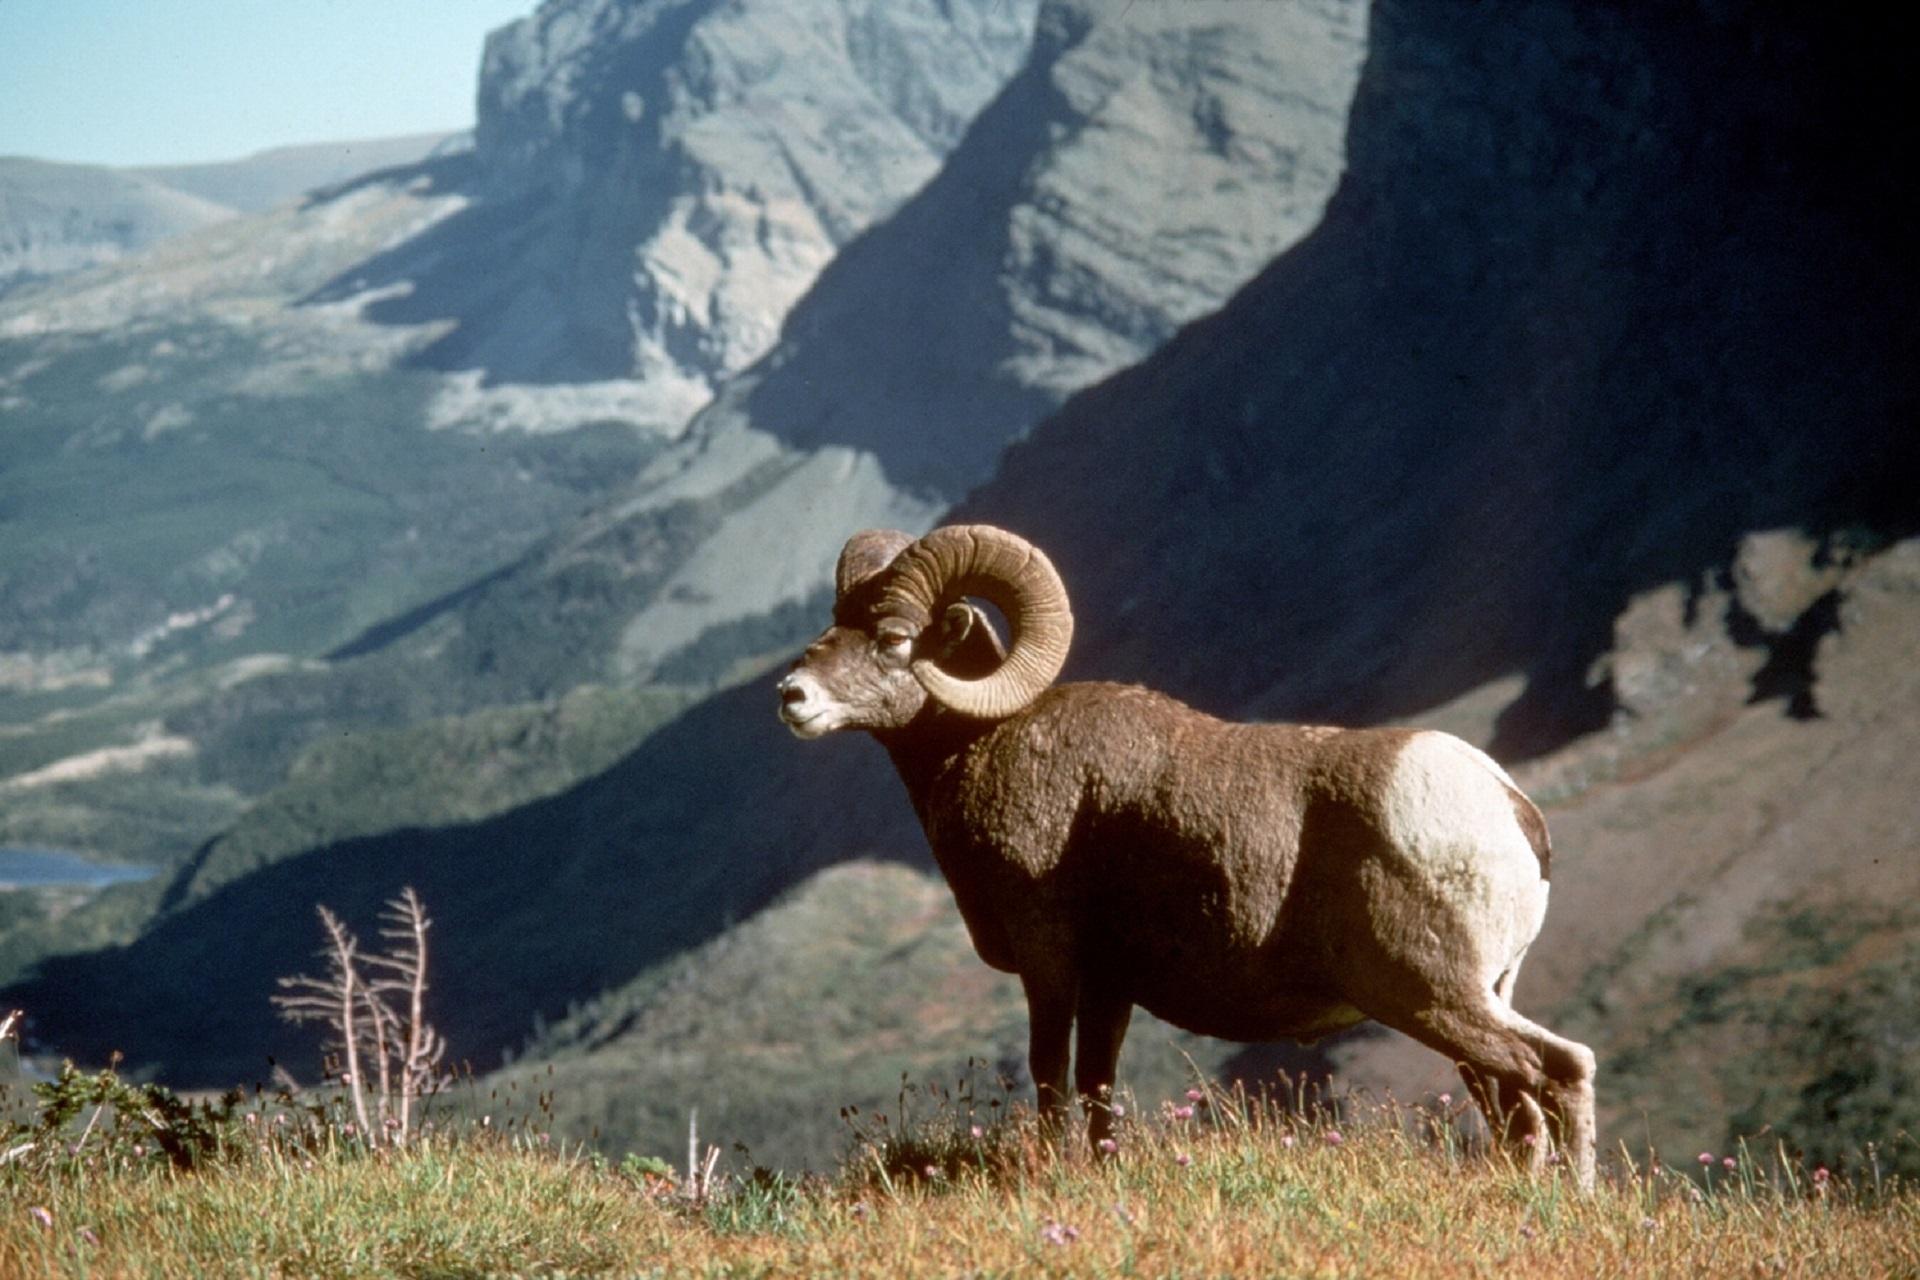 Bighorn sheep, another name for the hornbill